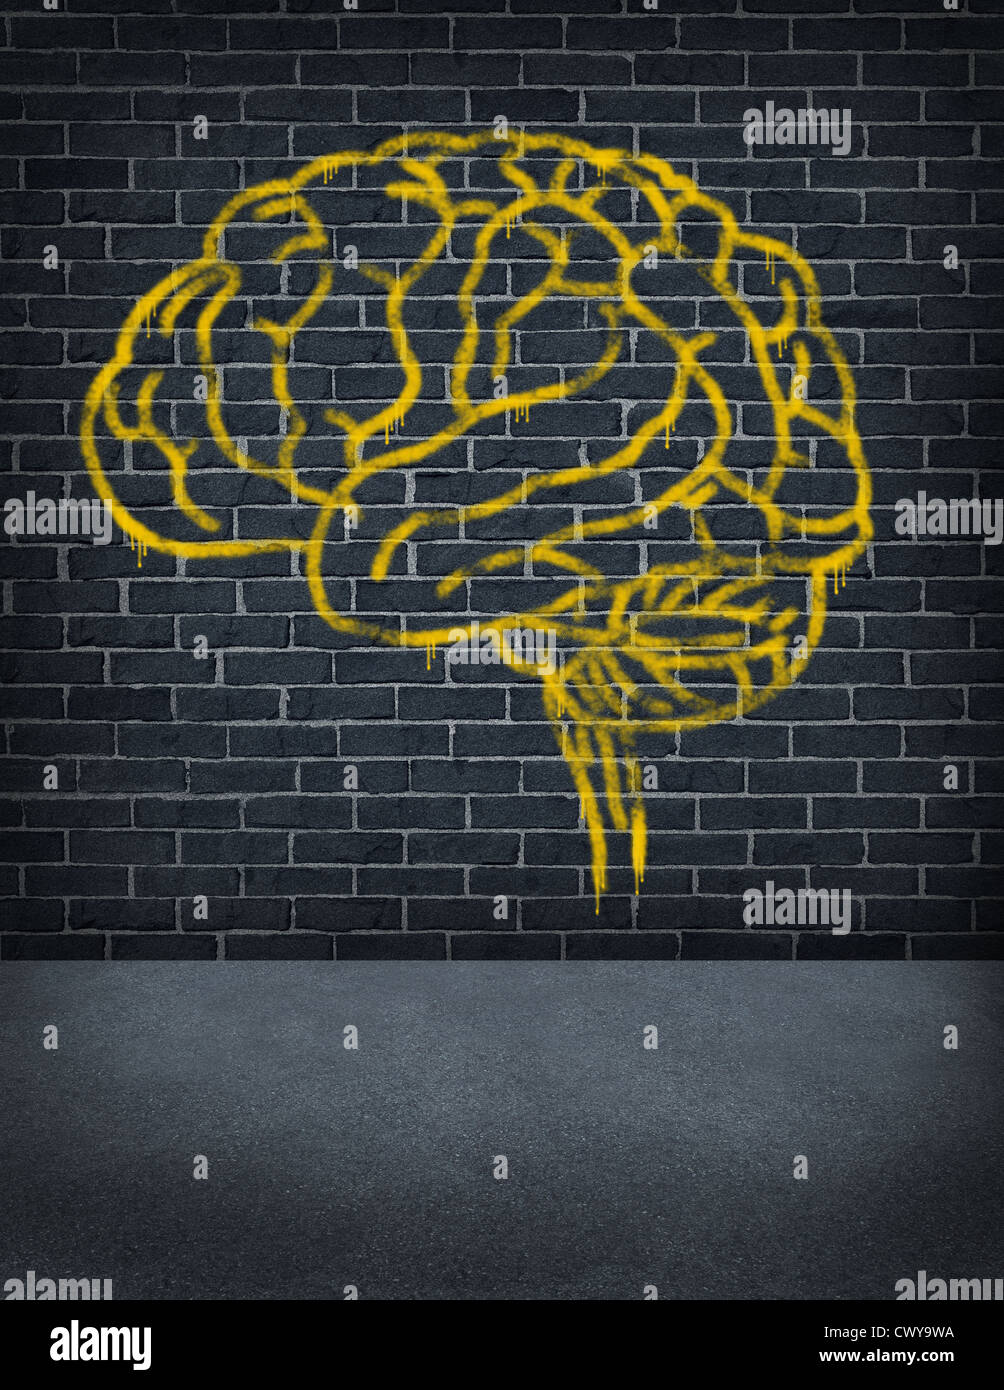 Criminal mind with a sprayed graffiti painting of a human brain on an old outdoor street brick wall as a health care and legal symbol of criminal behavior and problems in social behavior. Stock Photo